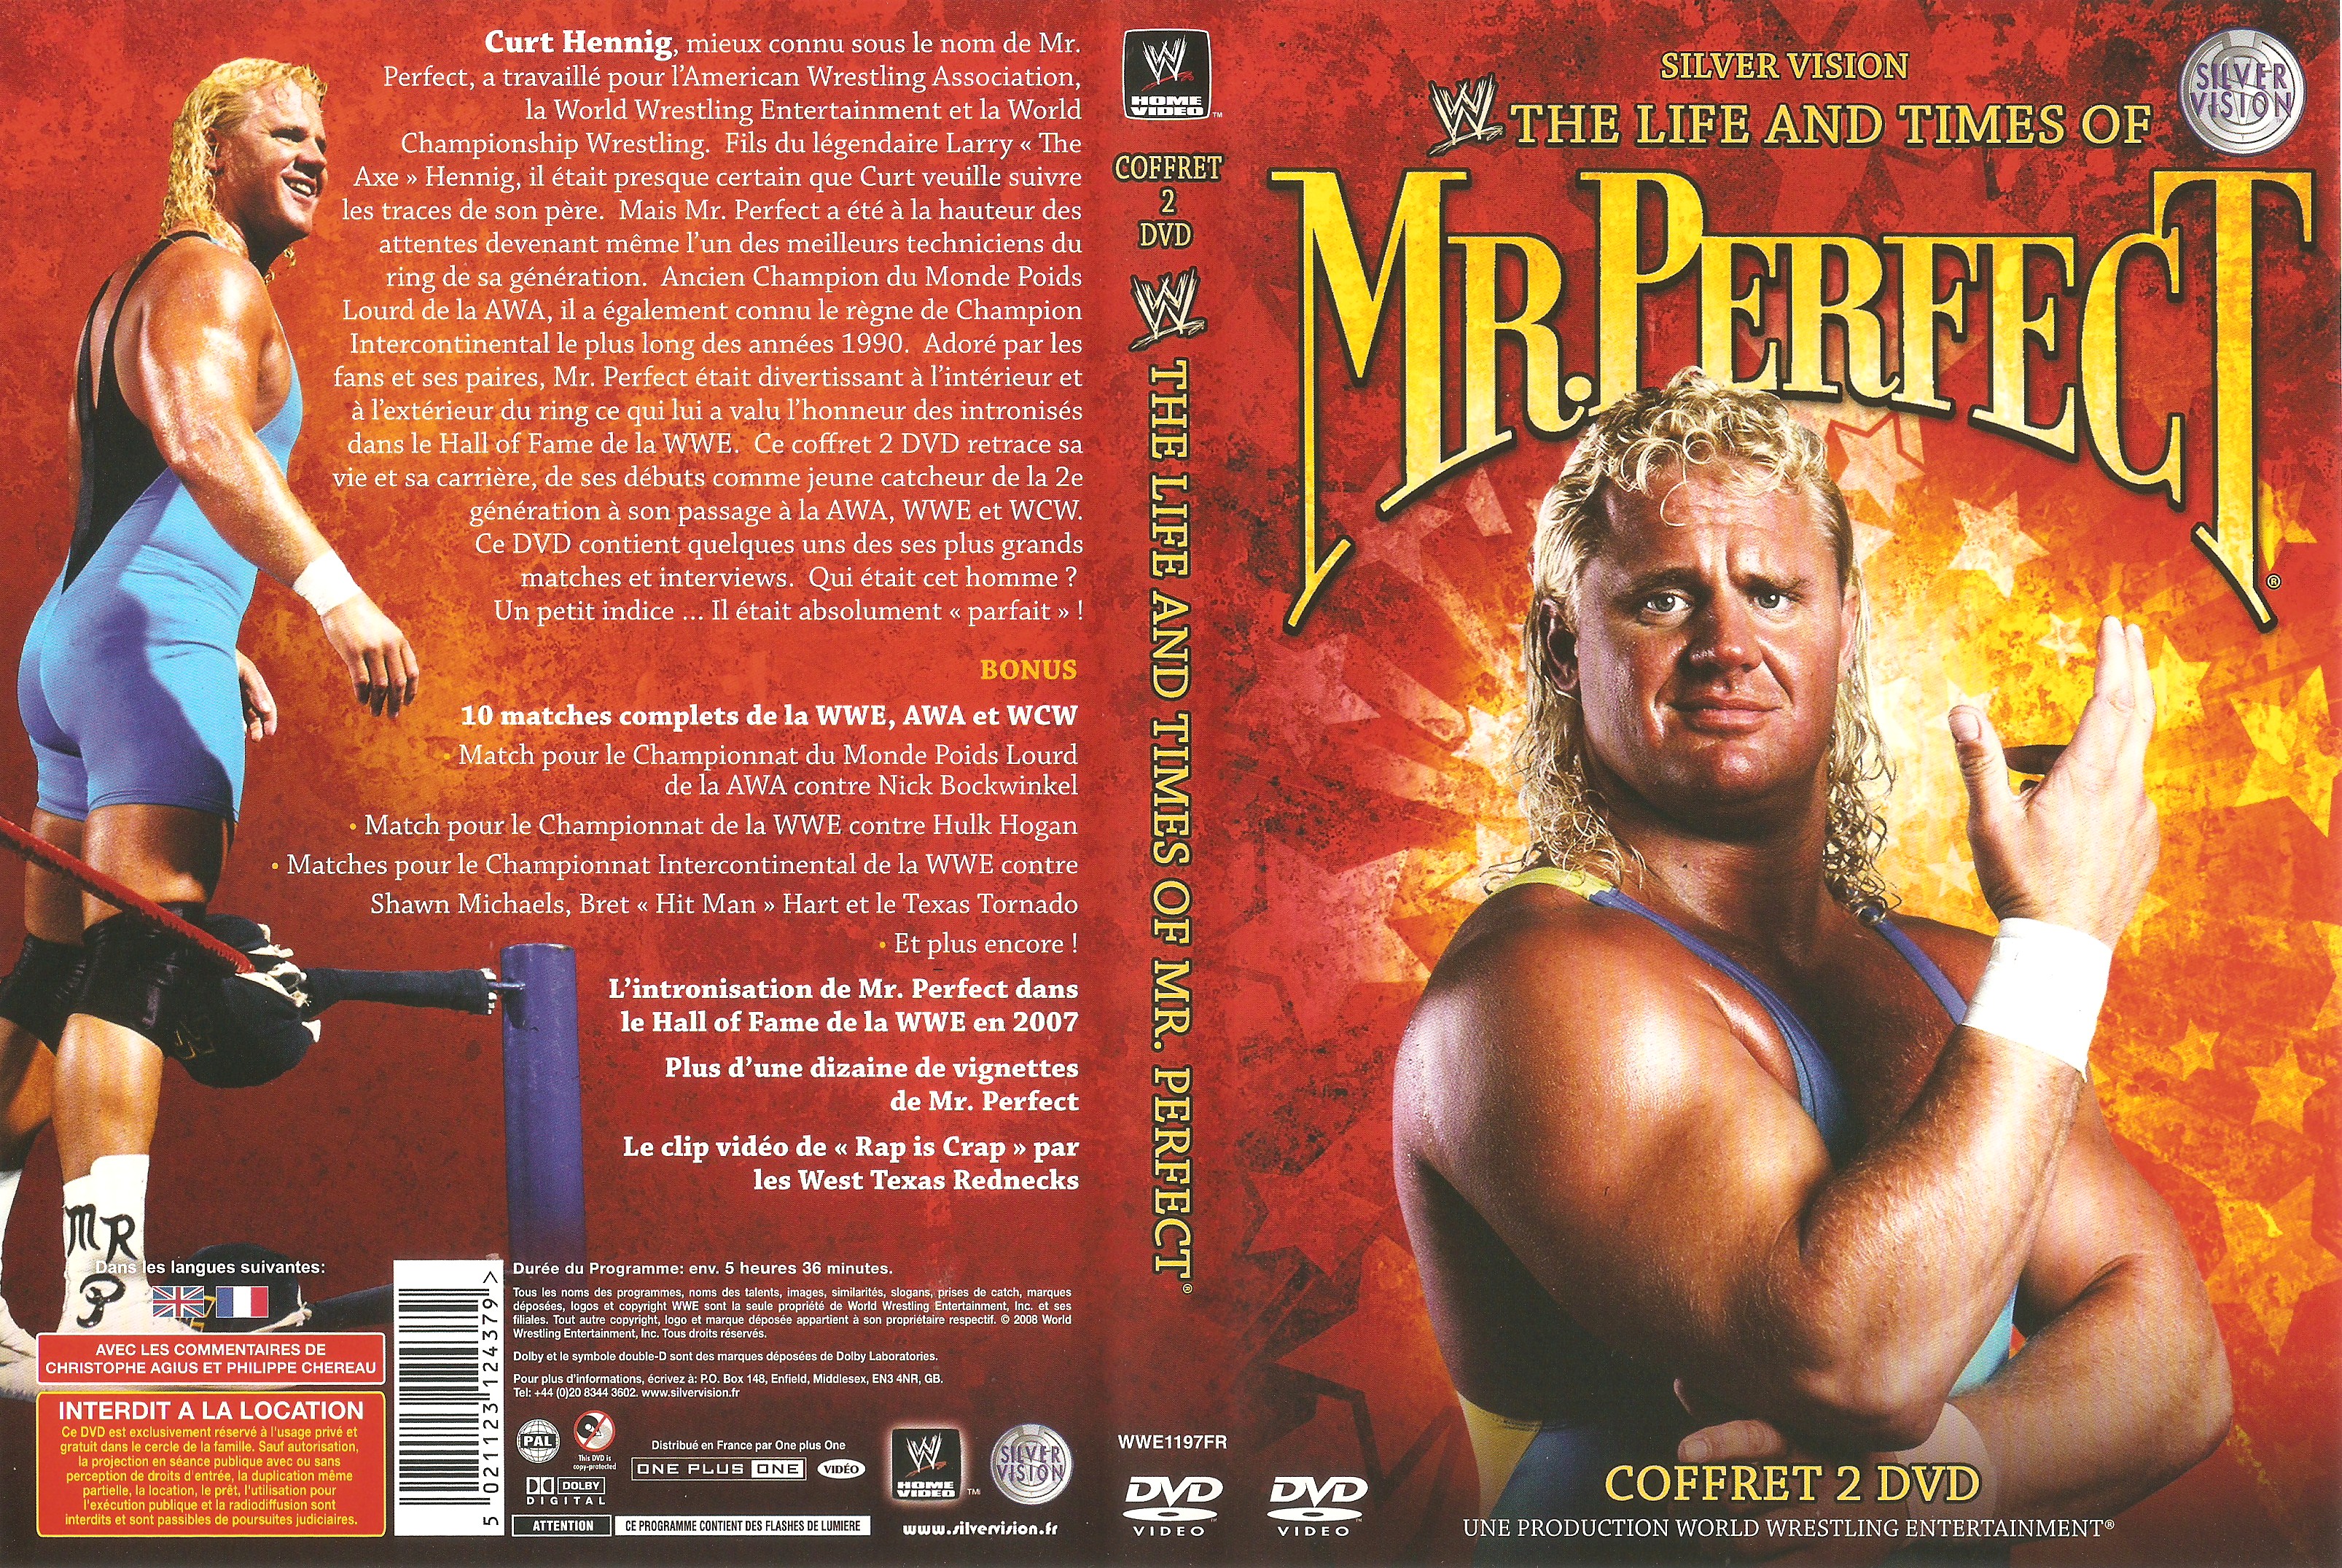 Jaquette DVD WWE The life and times of Mr Perfect